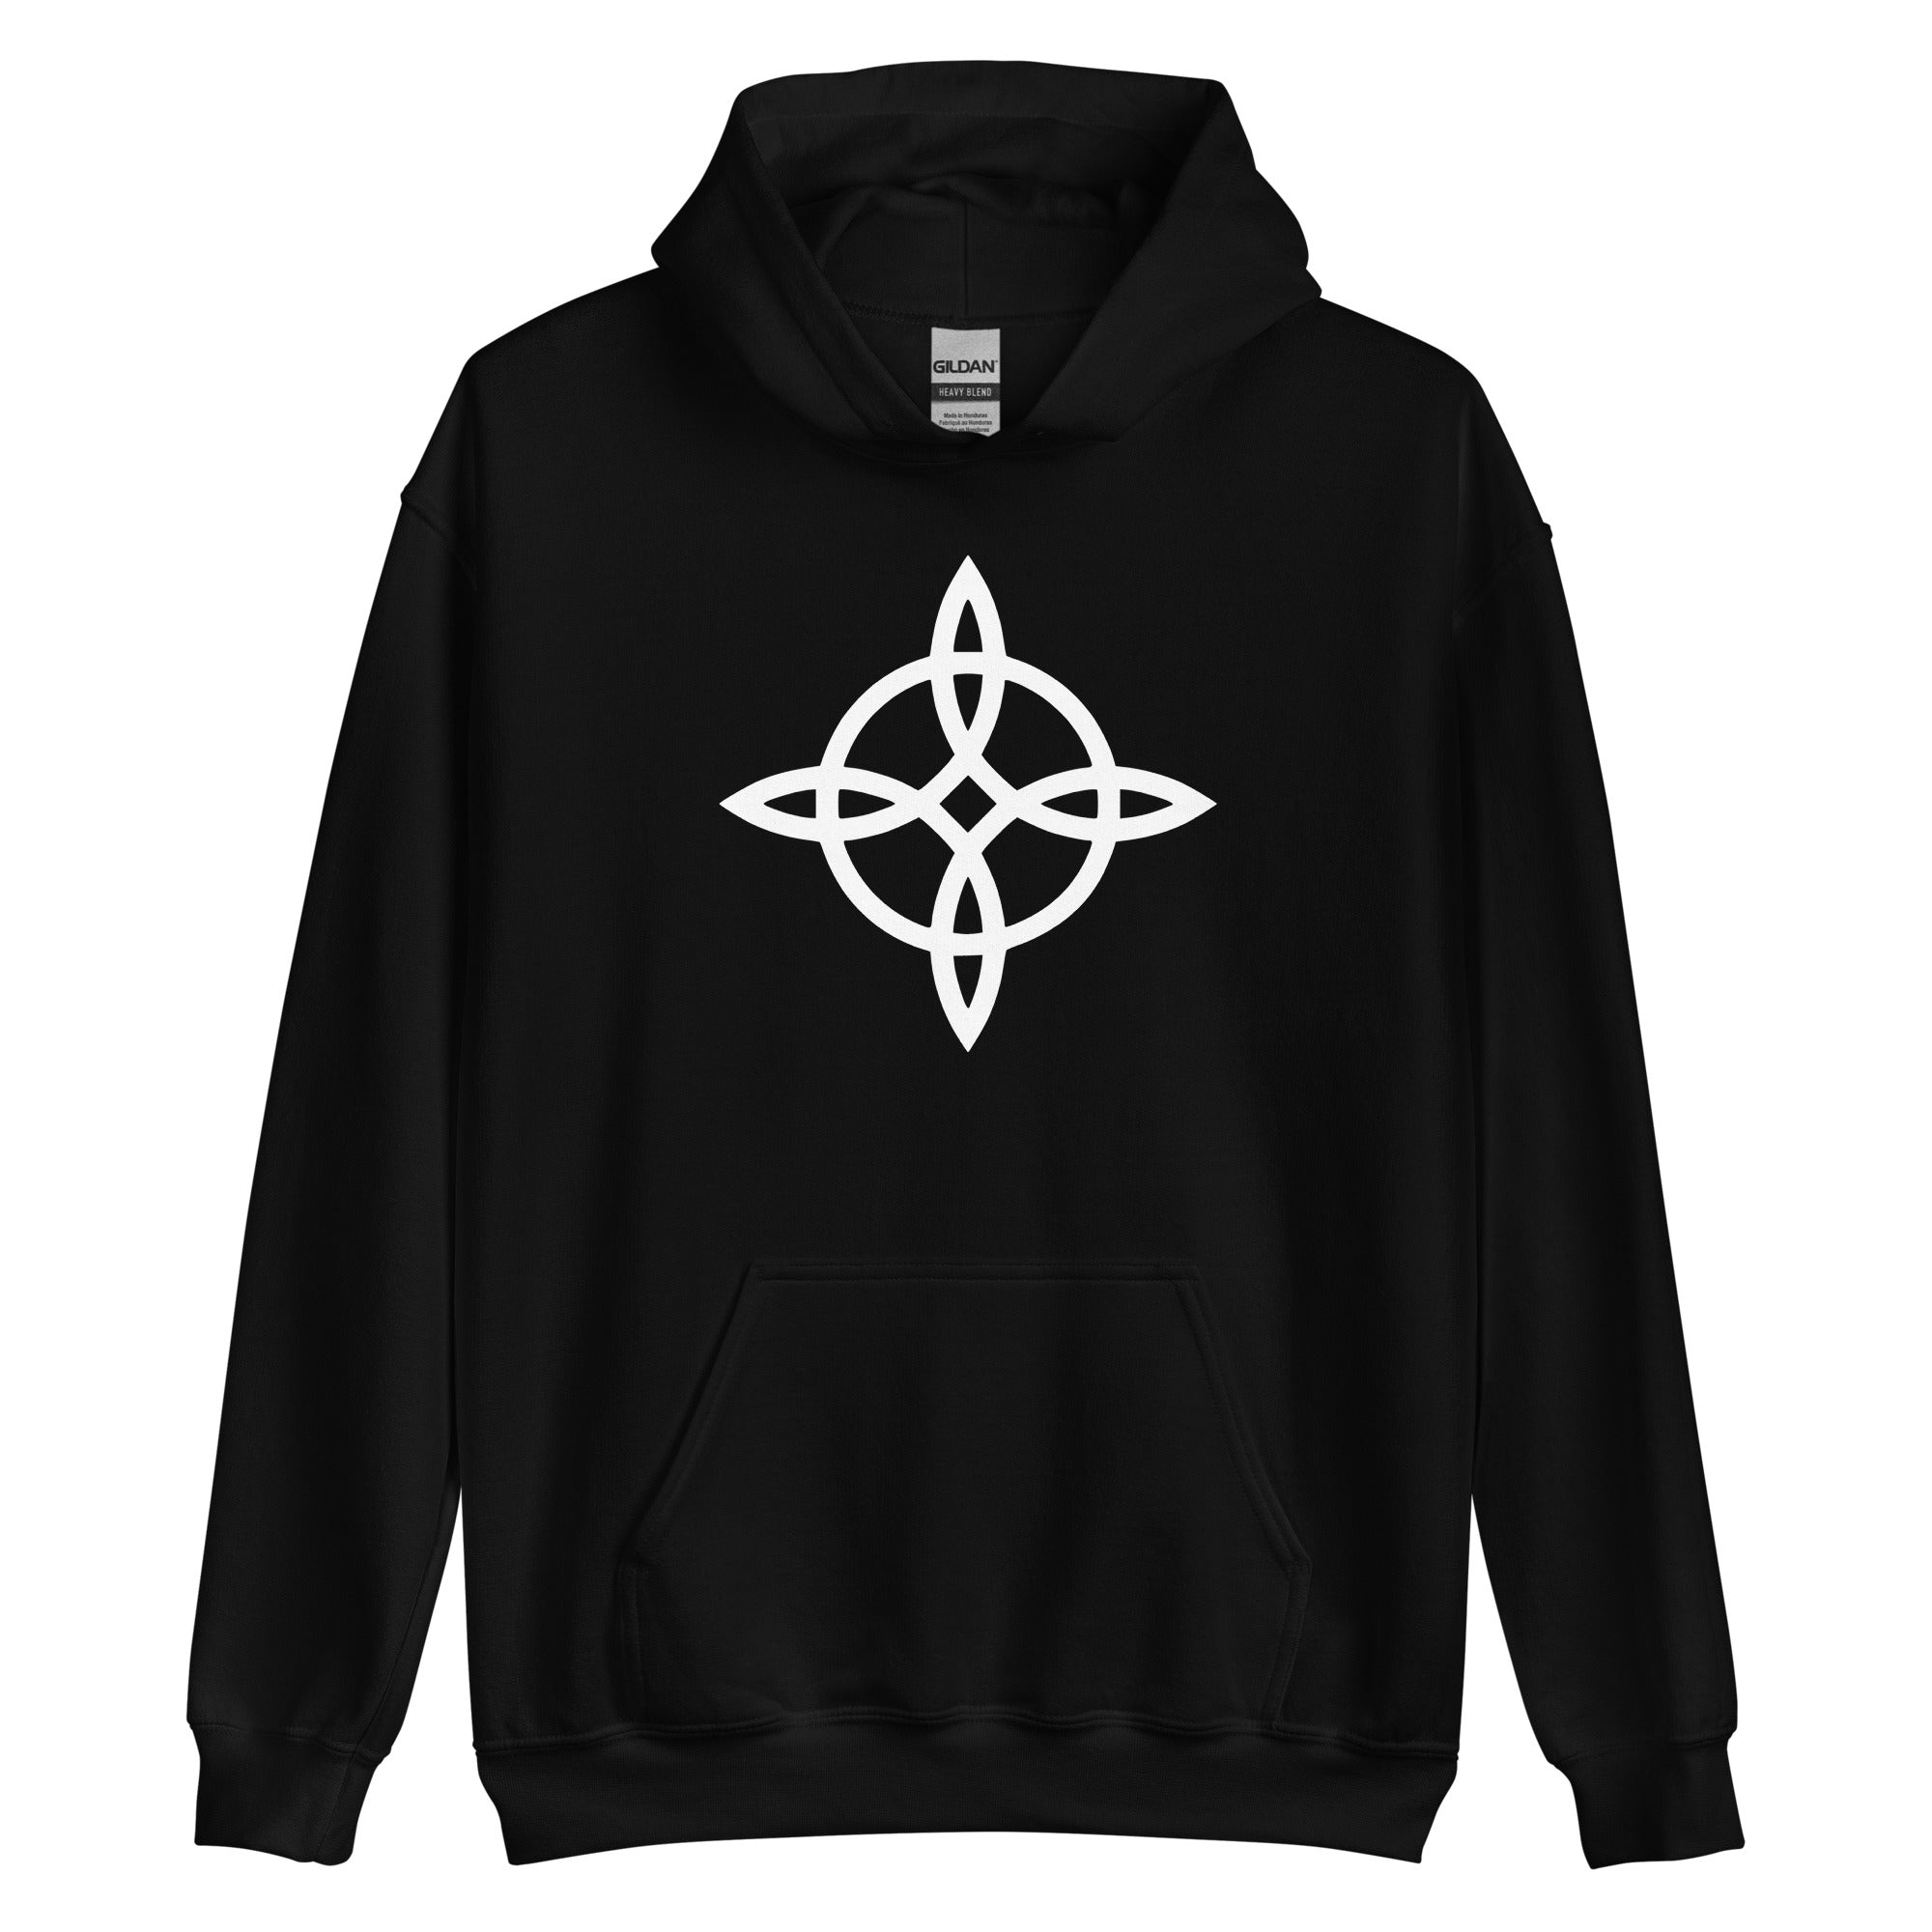 The Witches Knot Witchcraft Protection Symbol Hoodie Sweatshirt